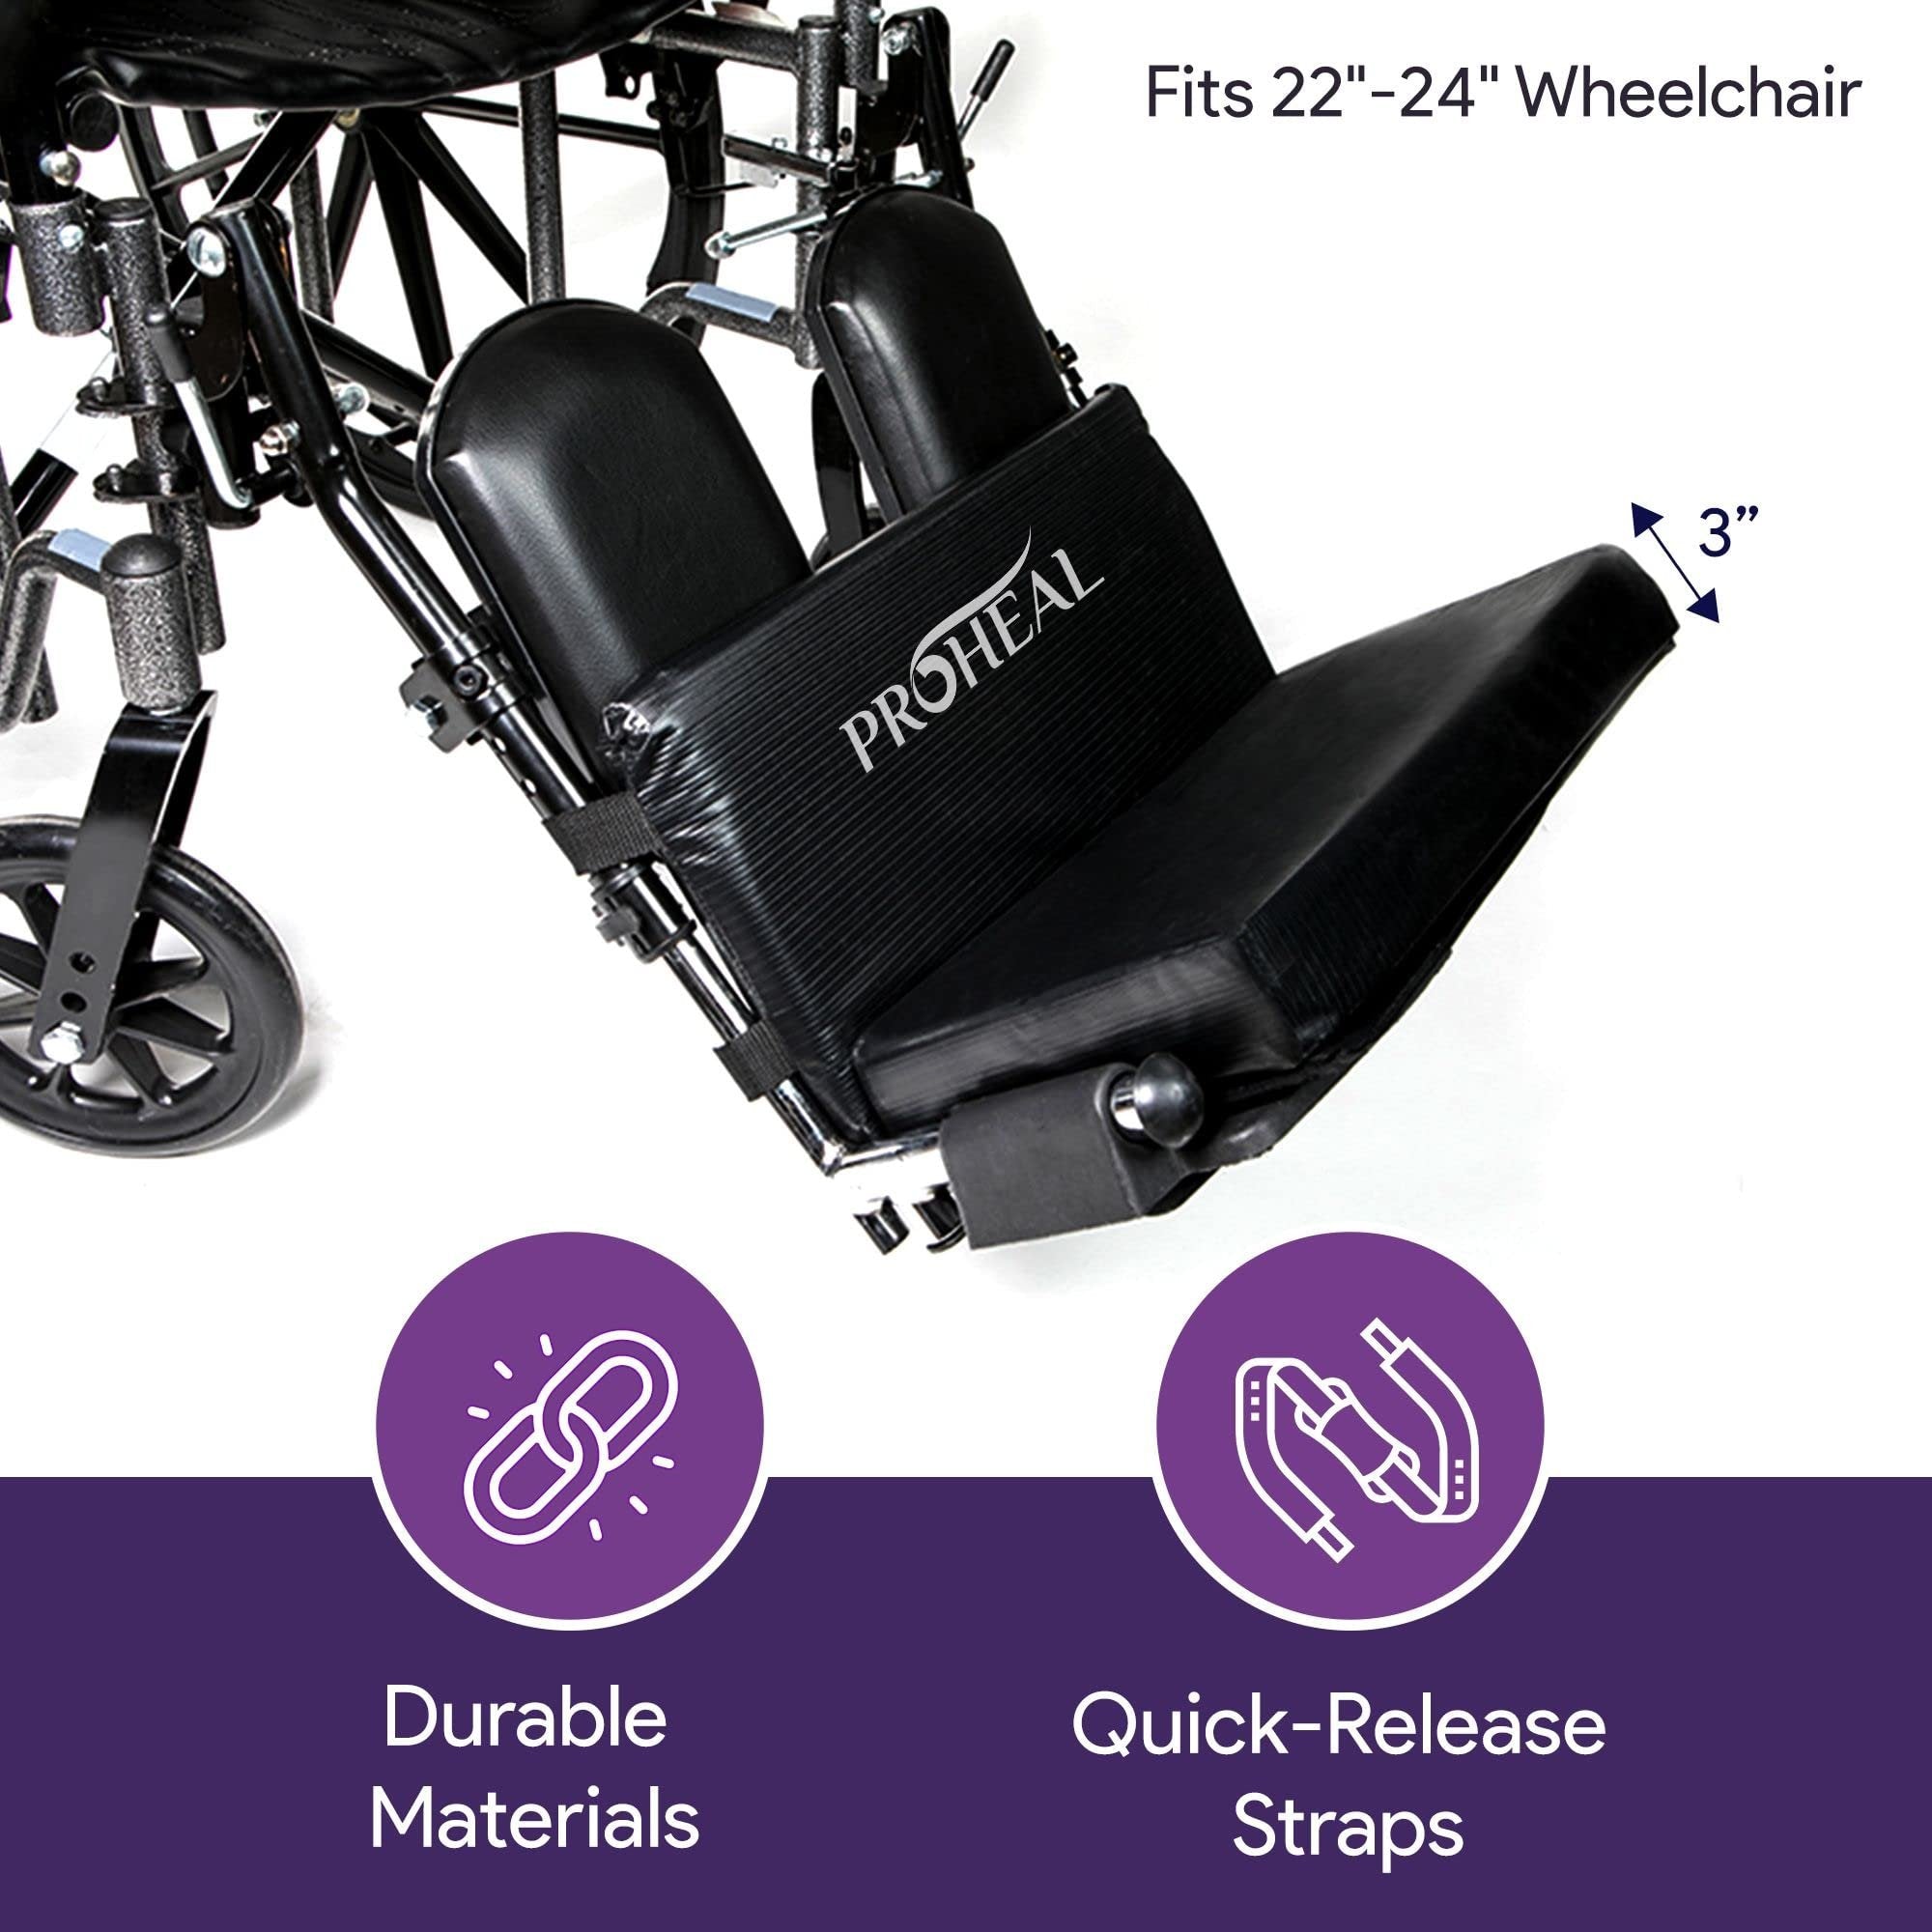 Wheelchair Leg Rest Extenders - Prevents Foot Drop and Contact with Wheel Chair Pedal - Wheelchair Accessories to Lift Foot, Align Posture and Seat Position - 22" - 24" - 3" High